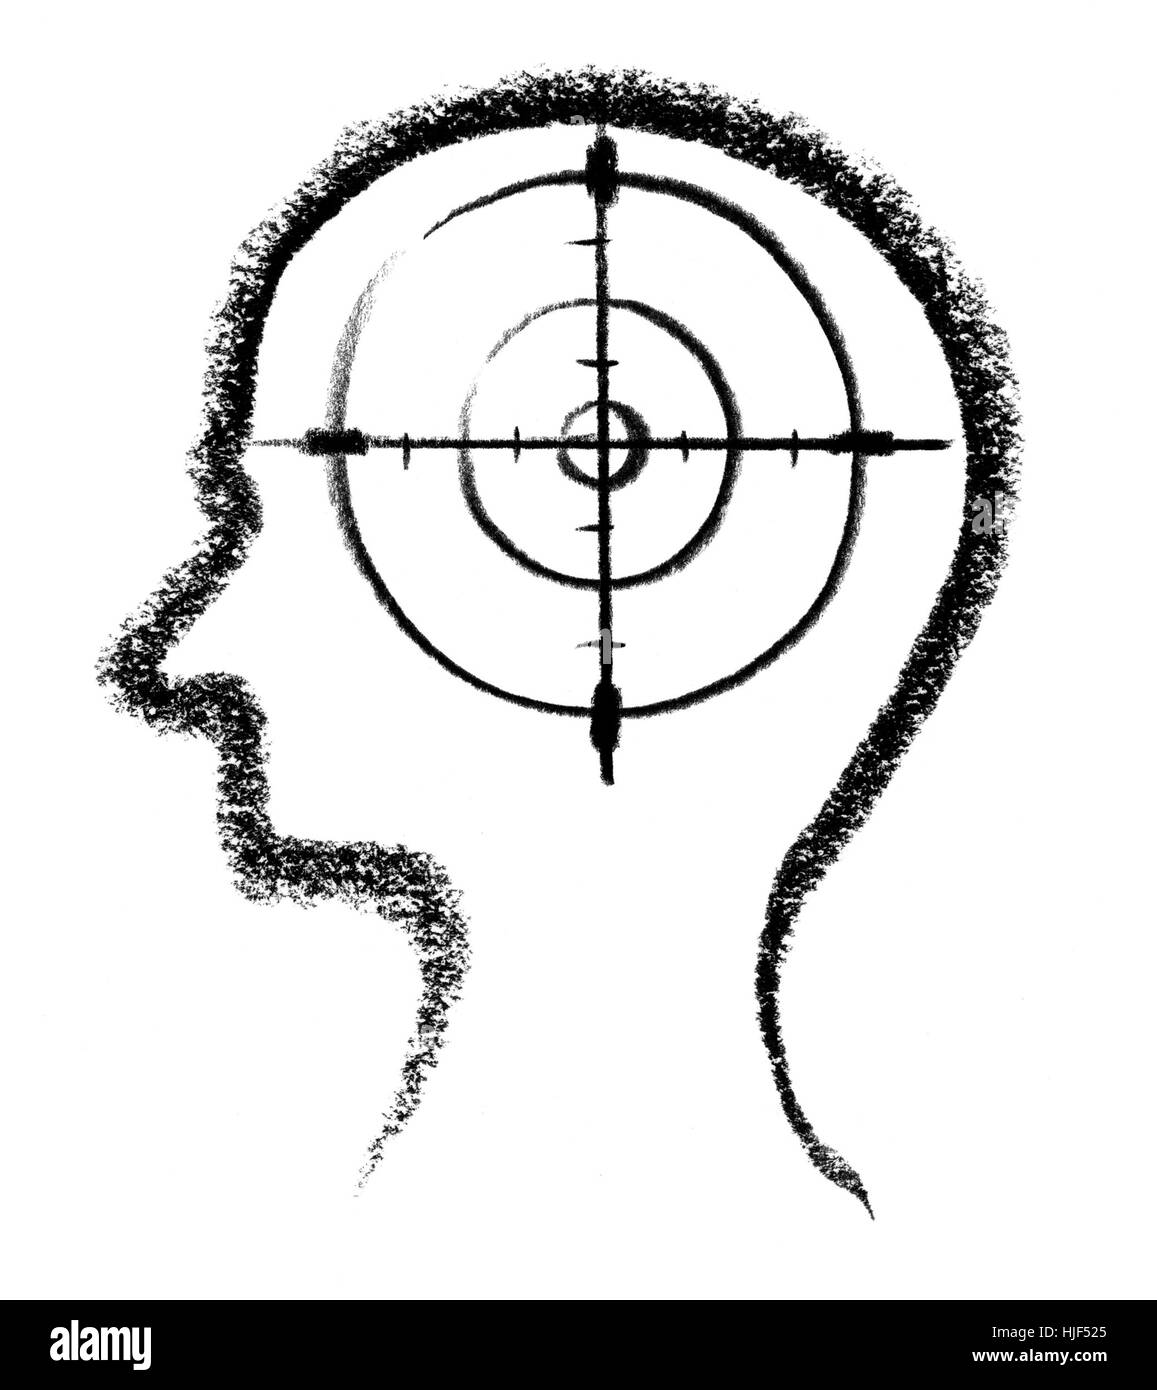 crayon-sketched illustration of a sight out human head silhouette Stock Photo